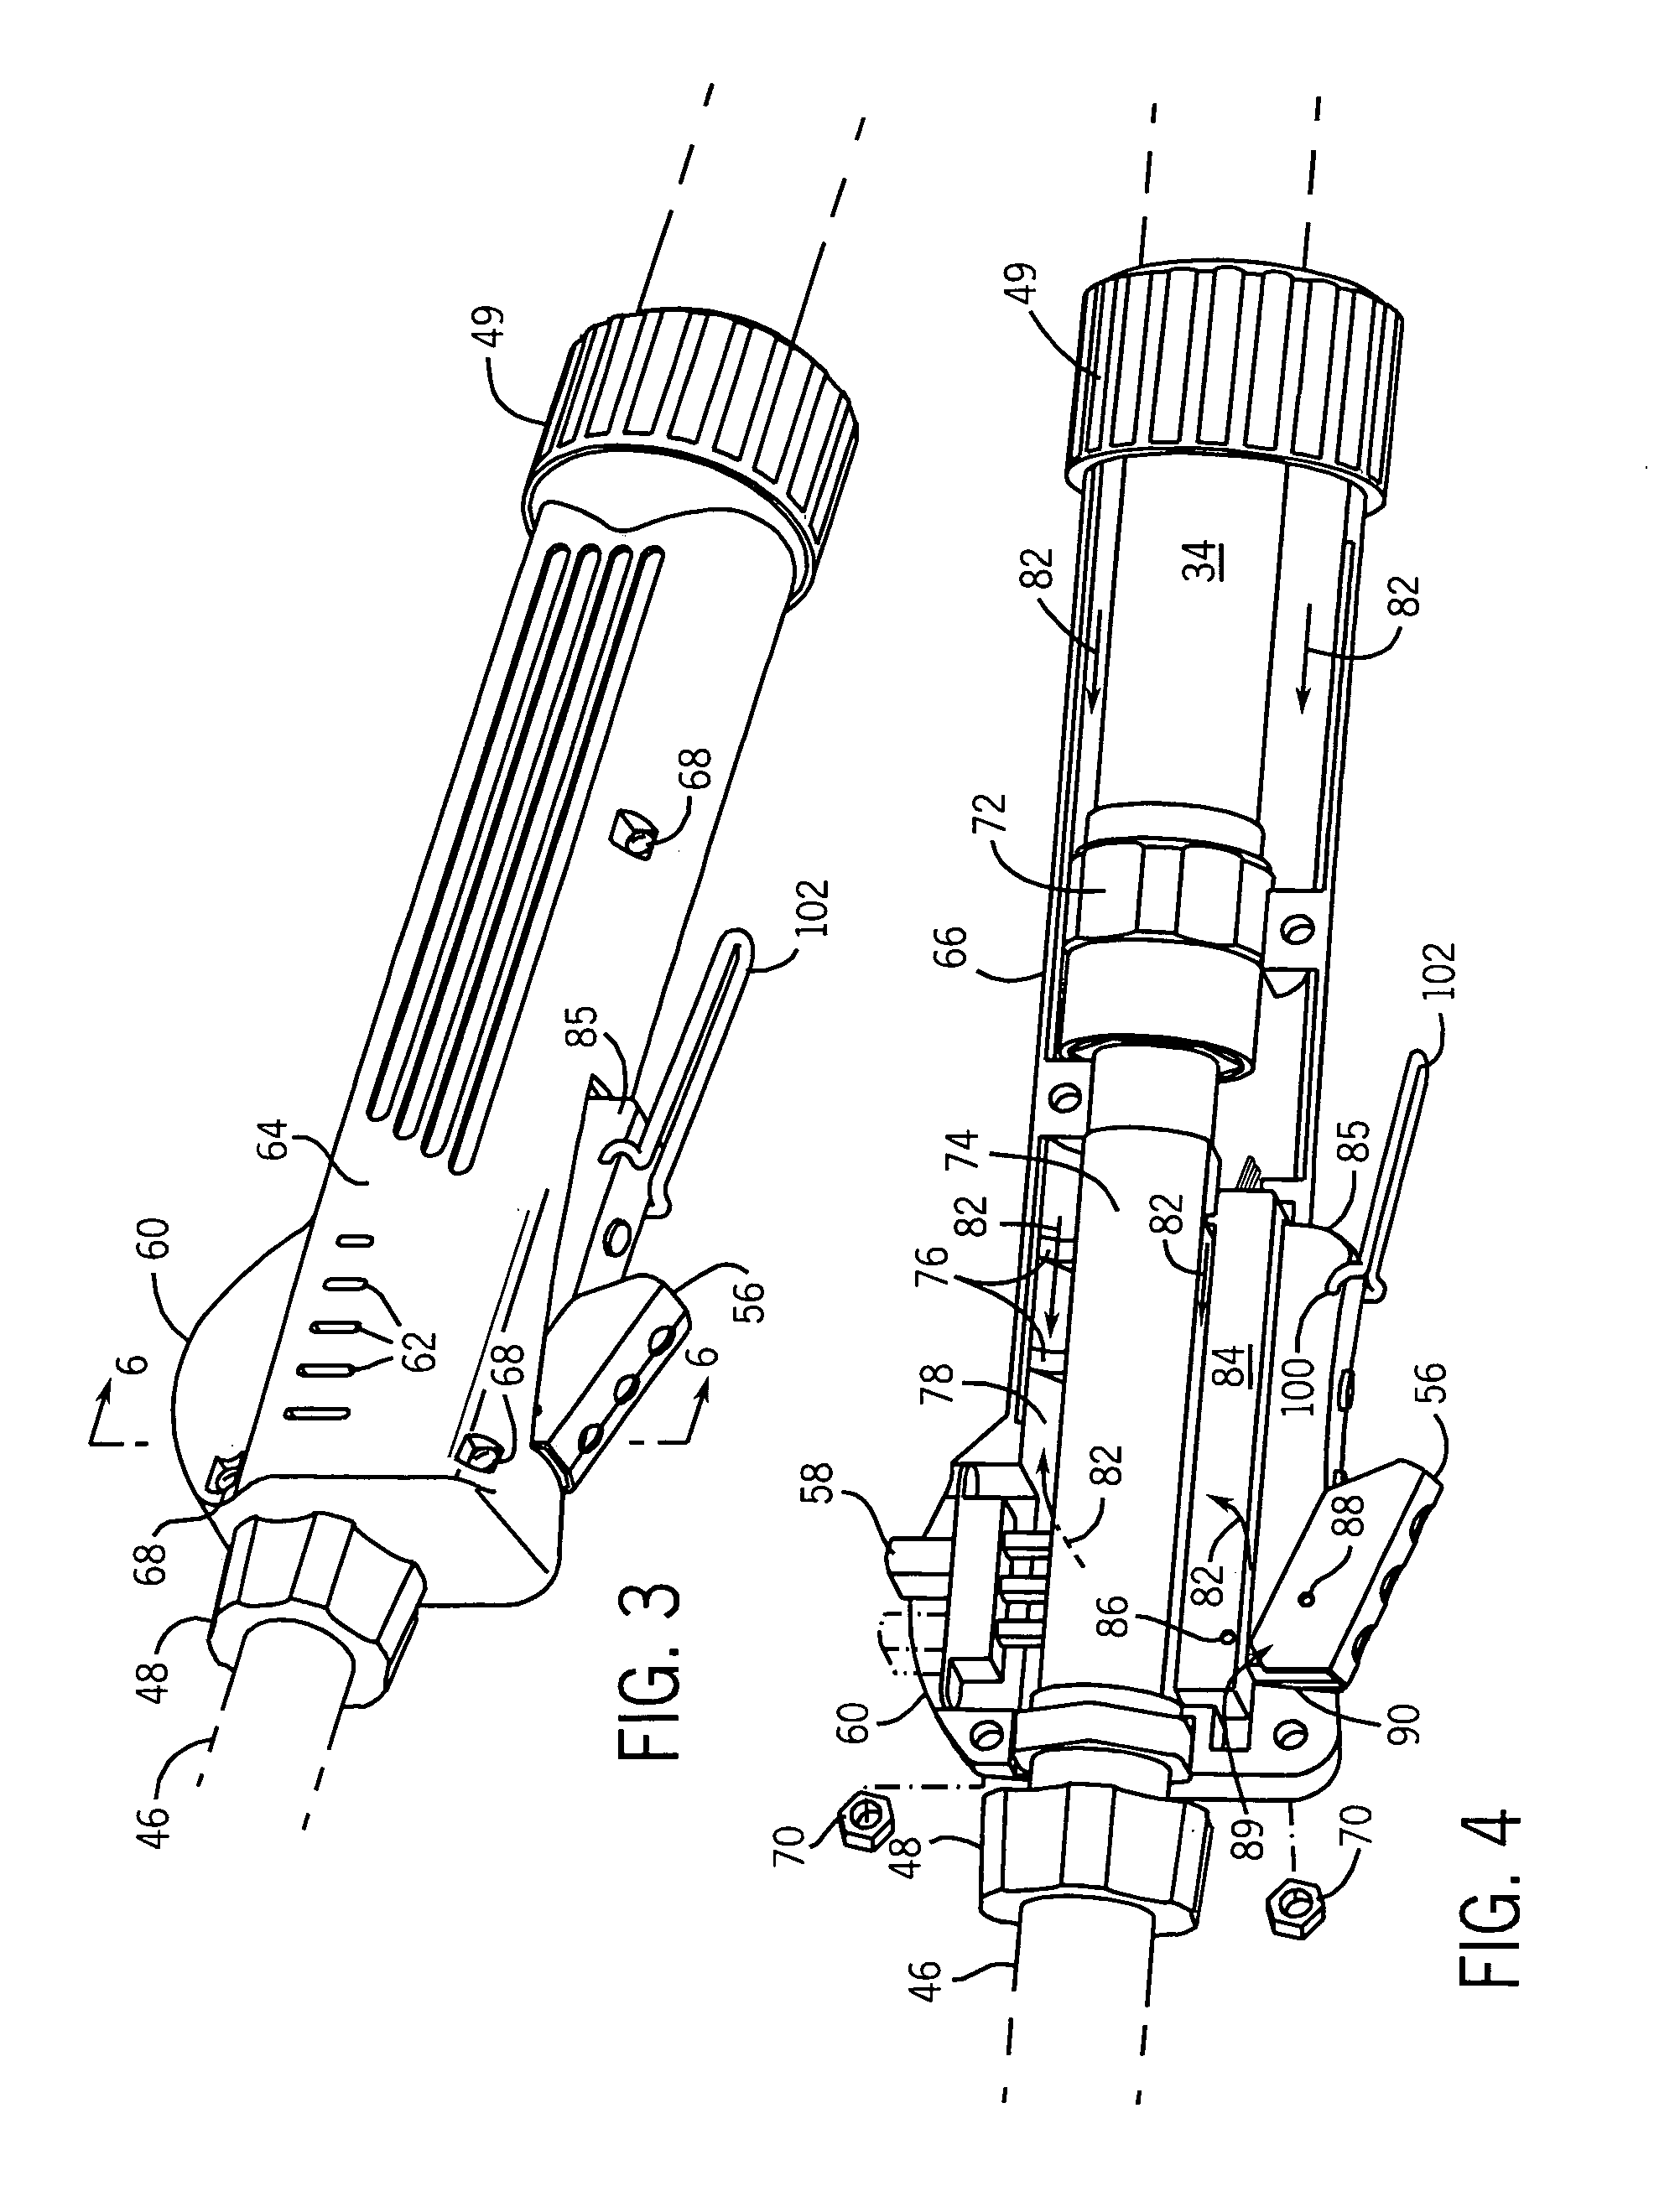 System and method for operating and locking a trigger of a welding gun